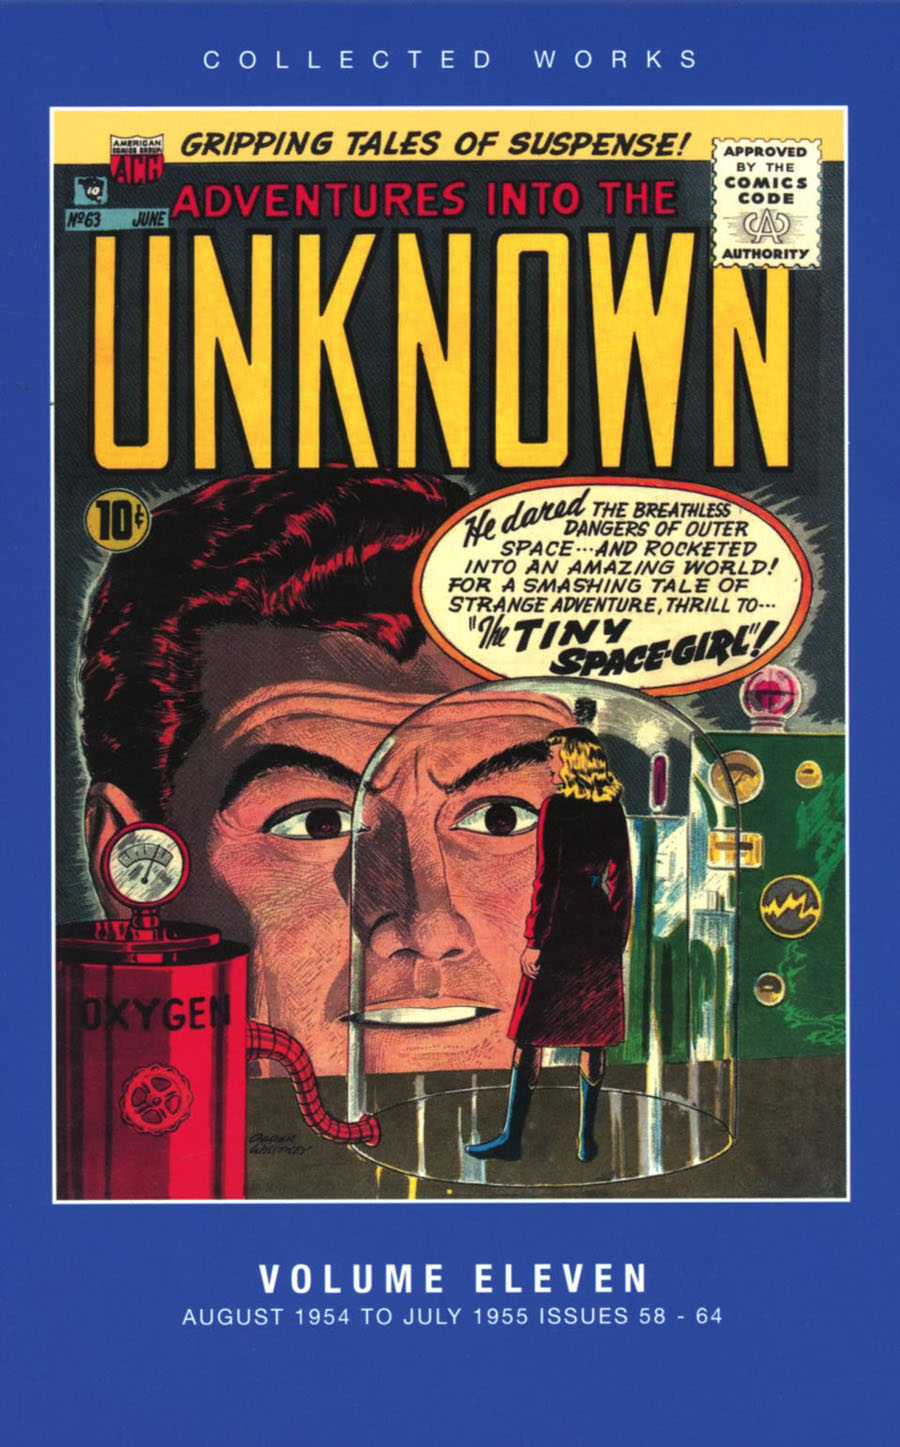 ACG Collected Works Adventures Into The Unknown Vol 11 HC